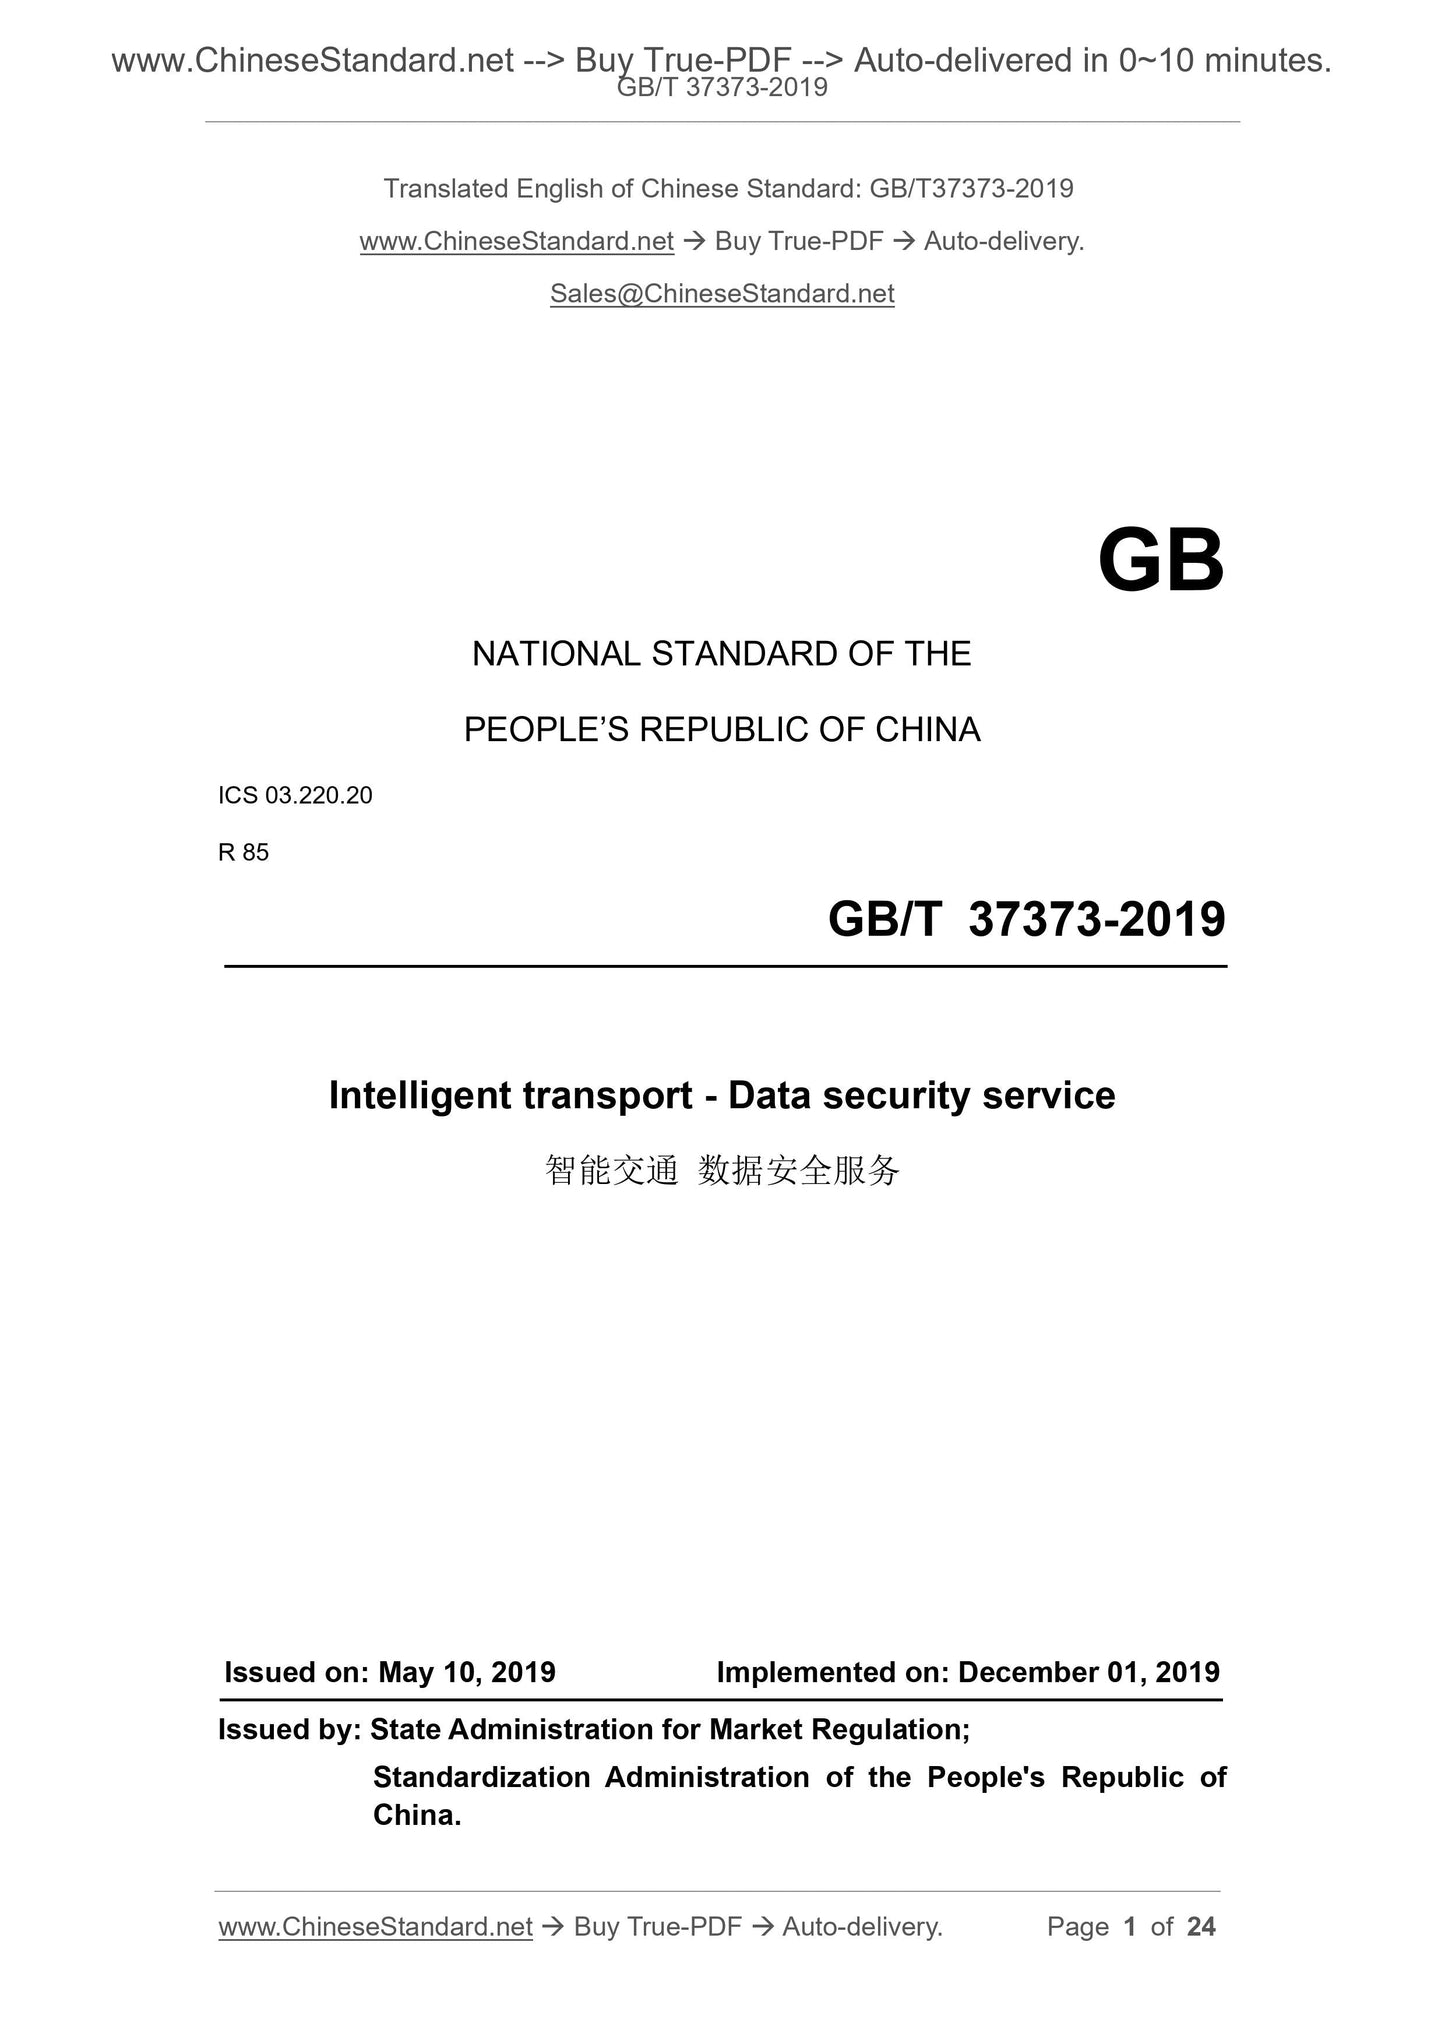 GB/T 37373-2019 Page 1